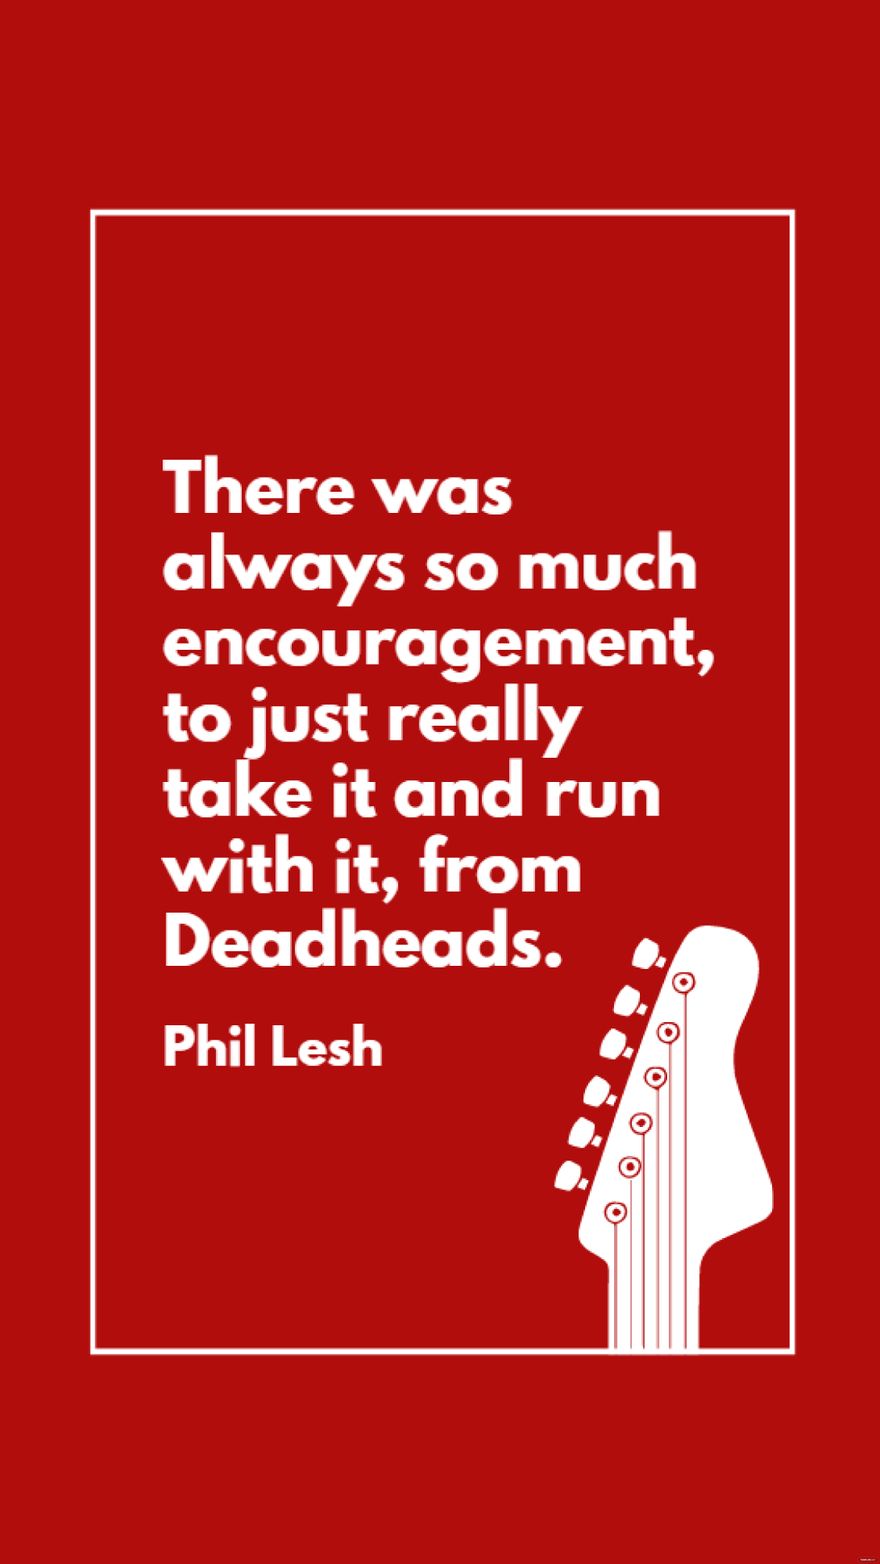 Phil Lesh - There was always so much encouragement, to just really take it and run with it, from Deadheads.